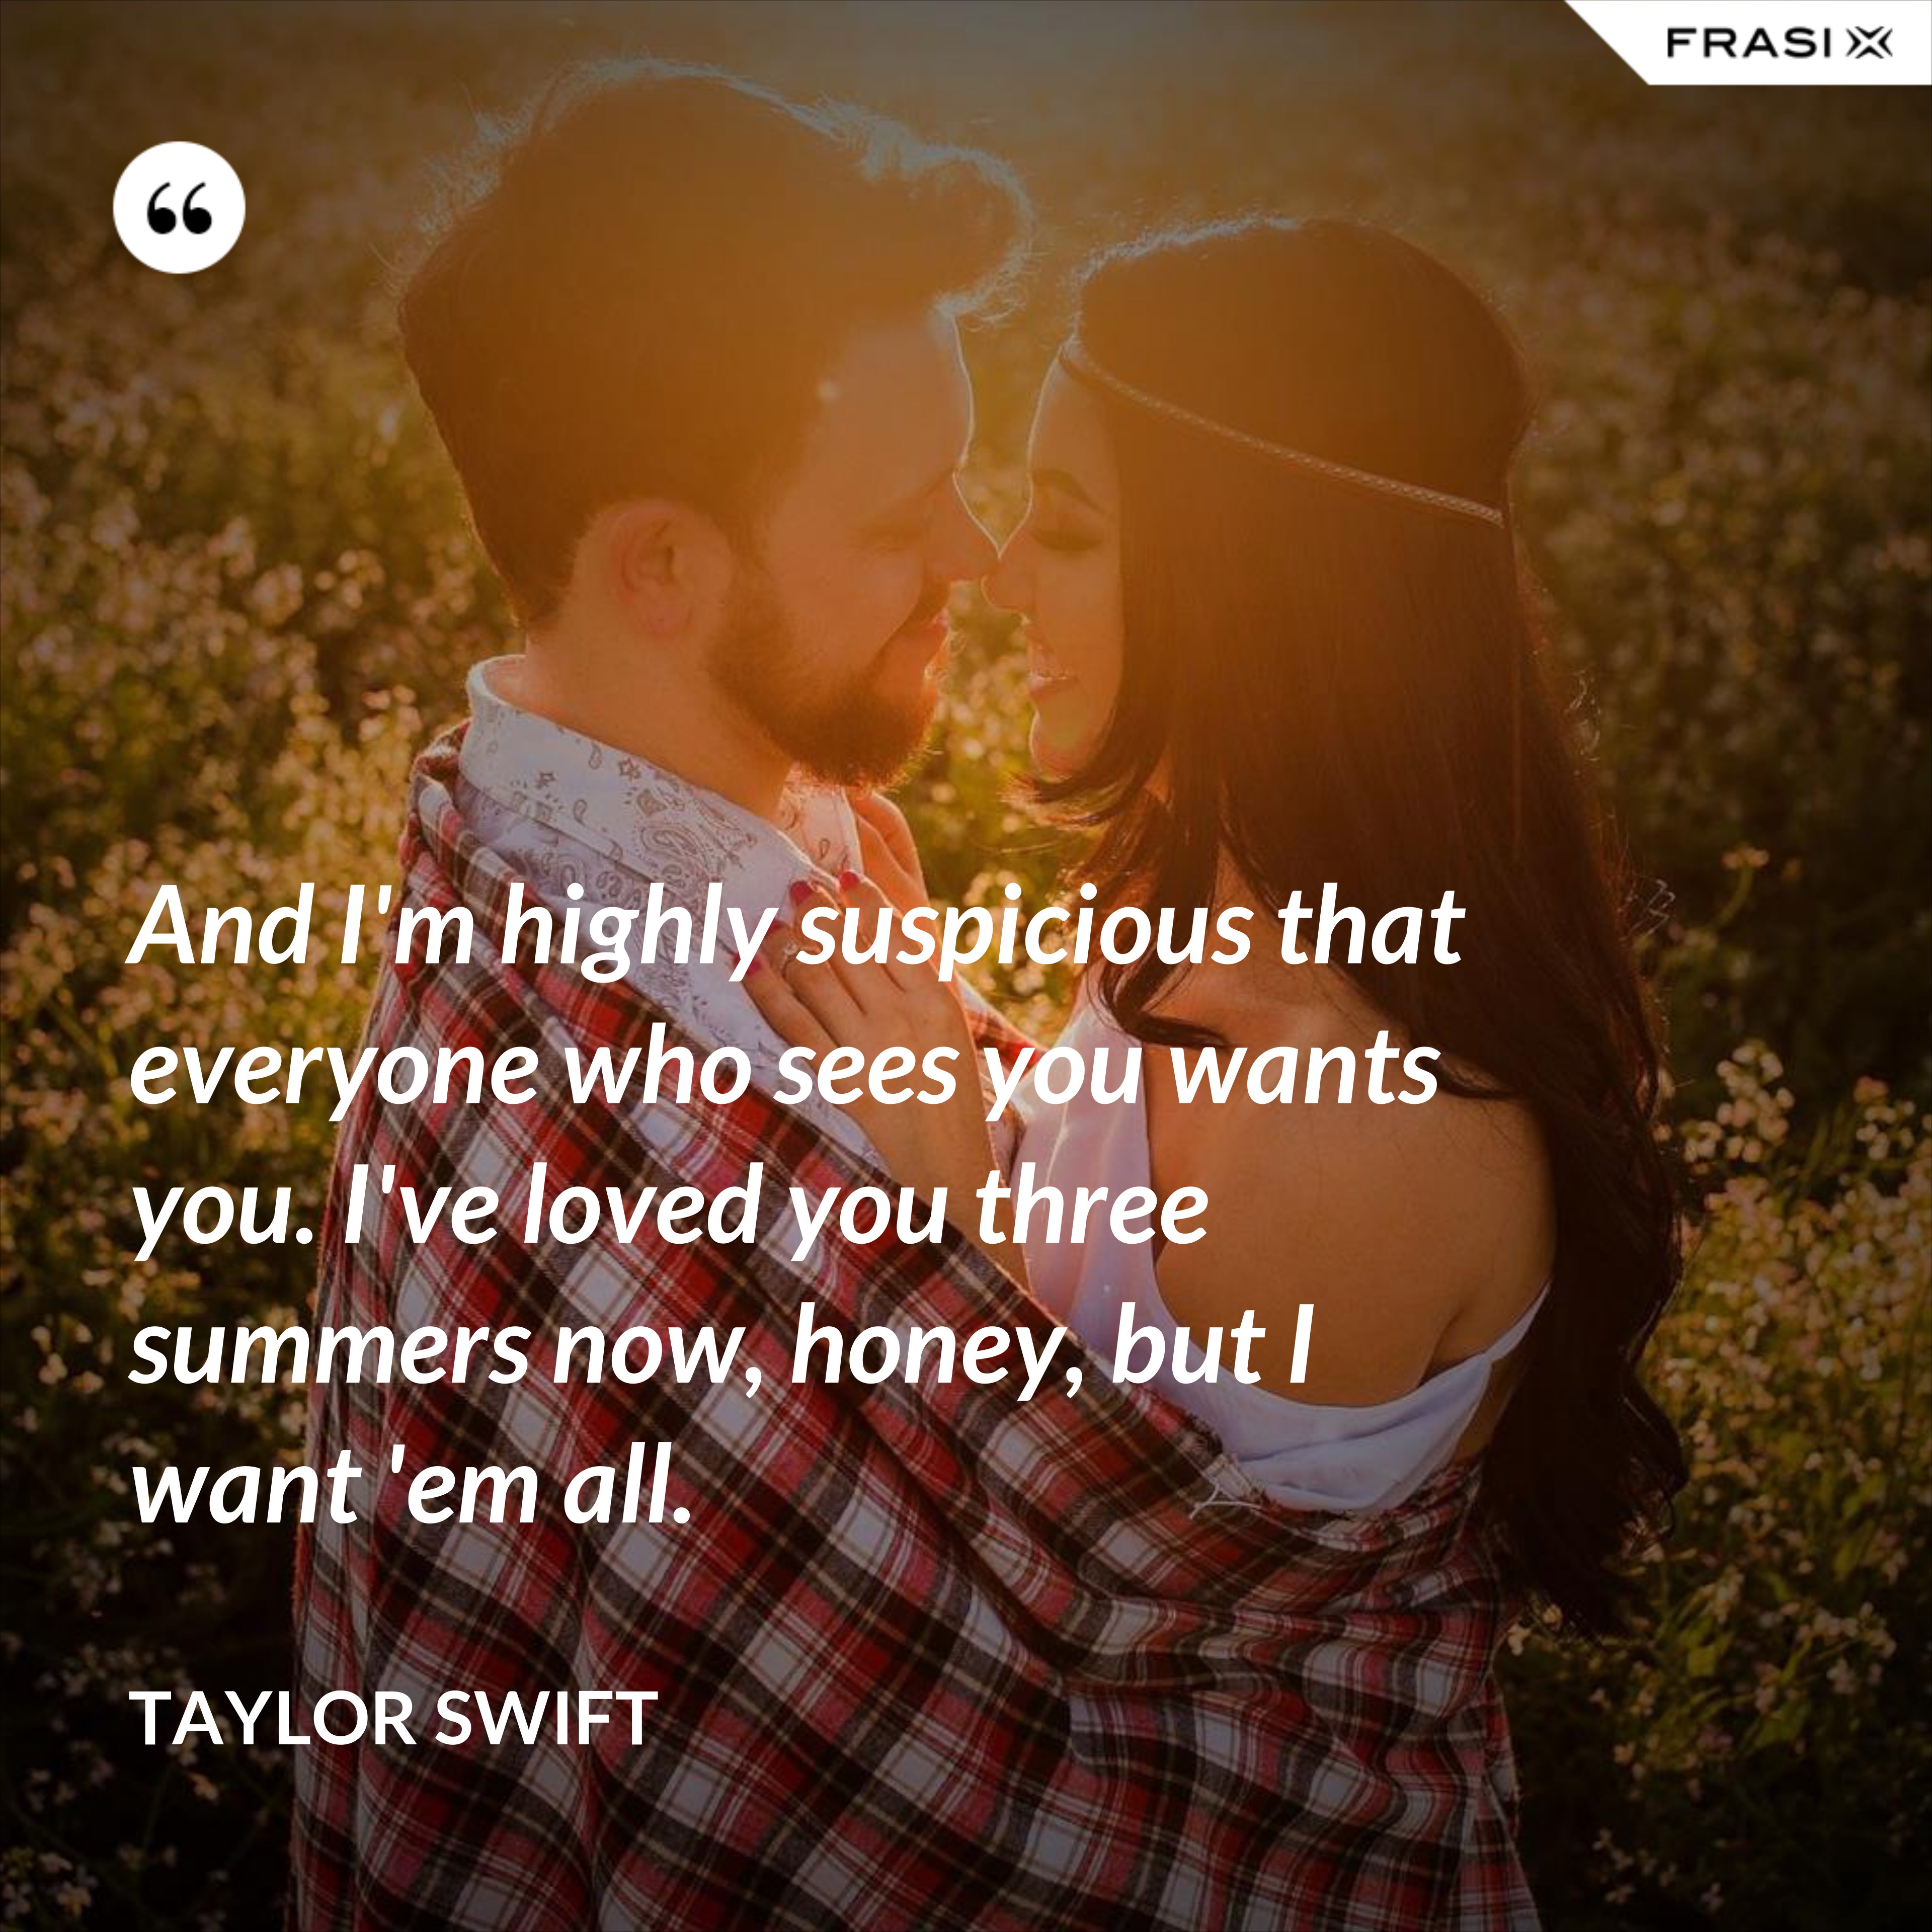 And I'm highly suspicious that everyone who sees you wants you. I've loved you three summers now, honey, but I want 'em all. - Taylor Swift